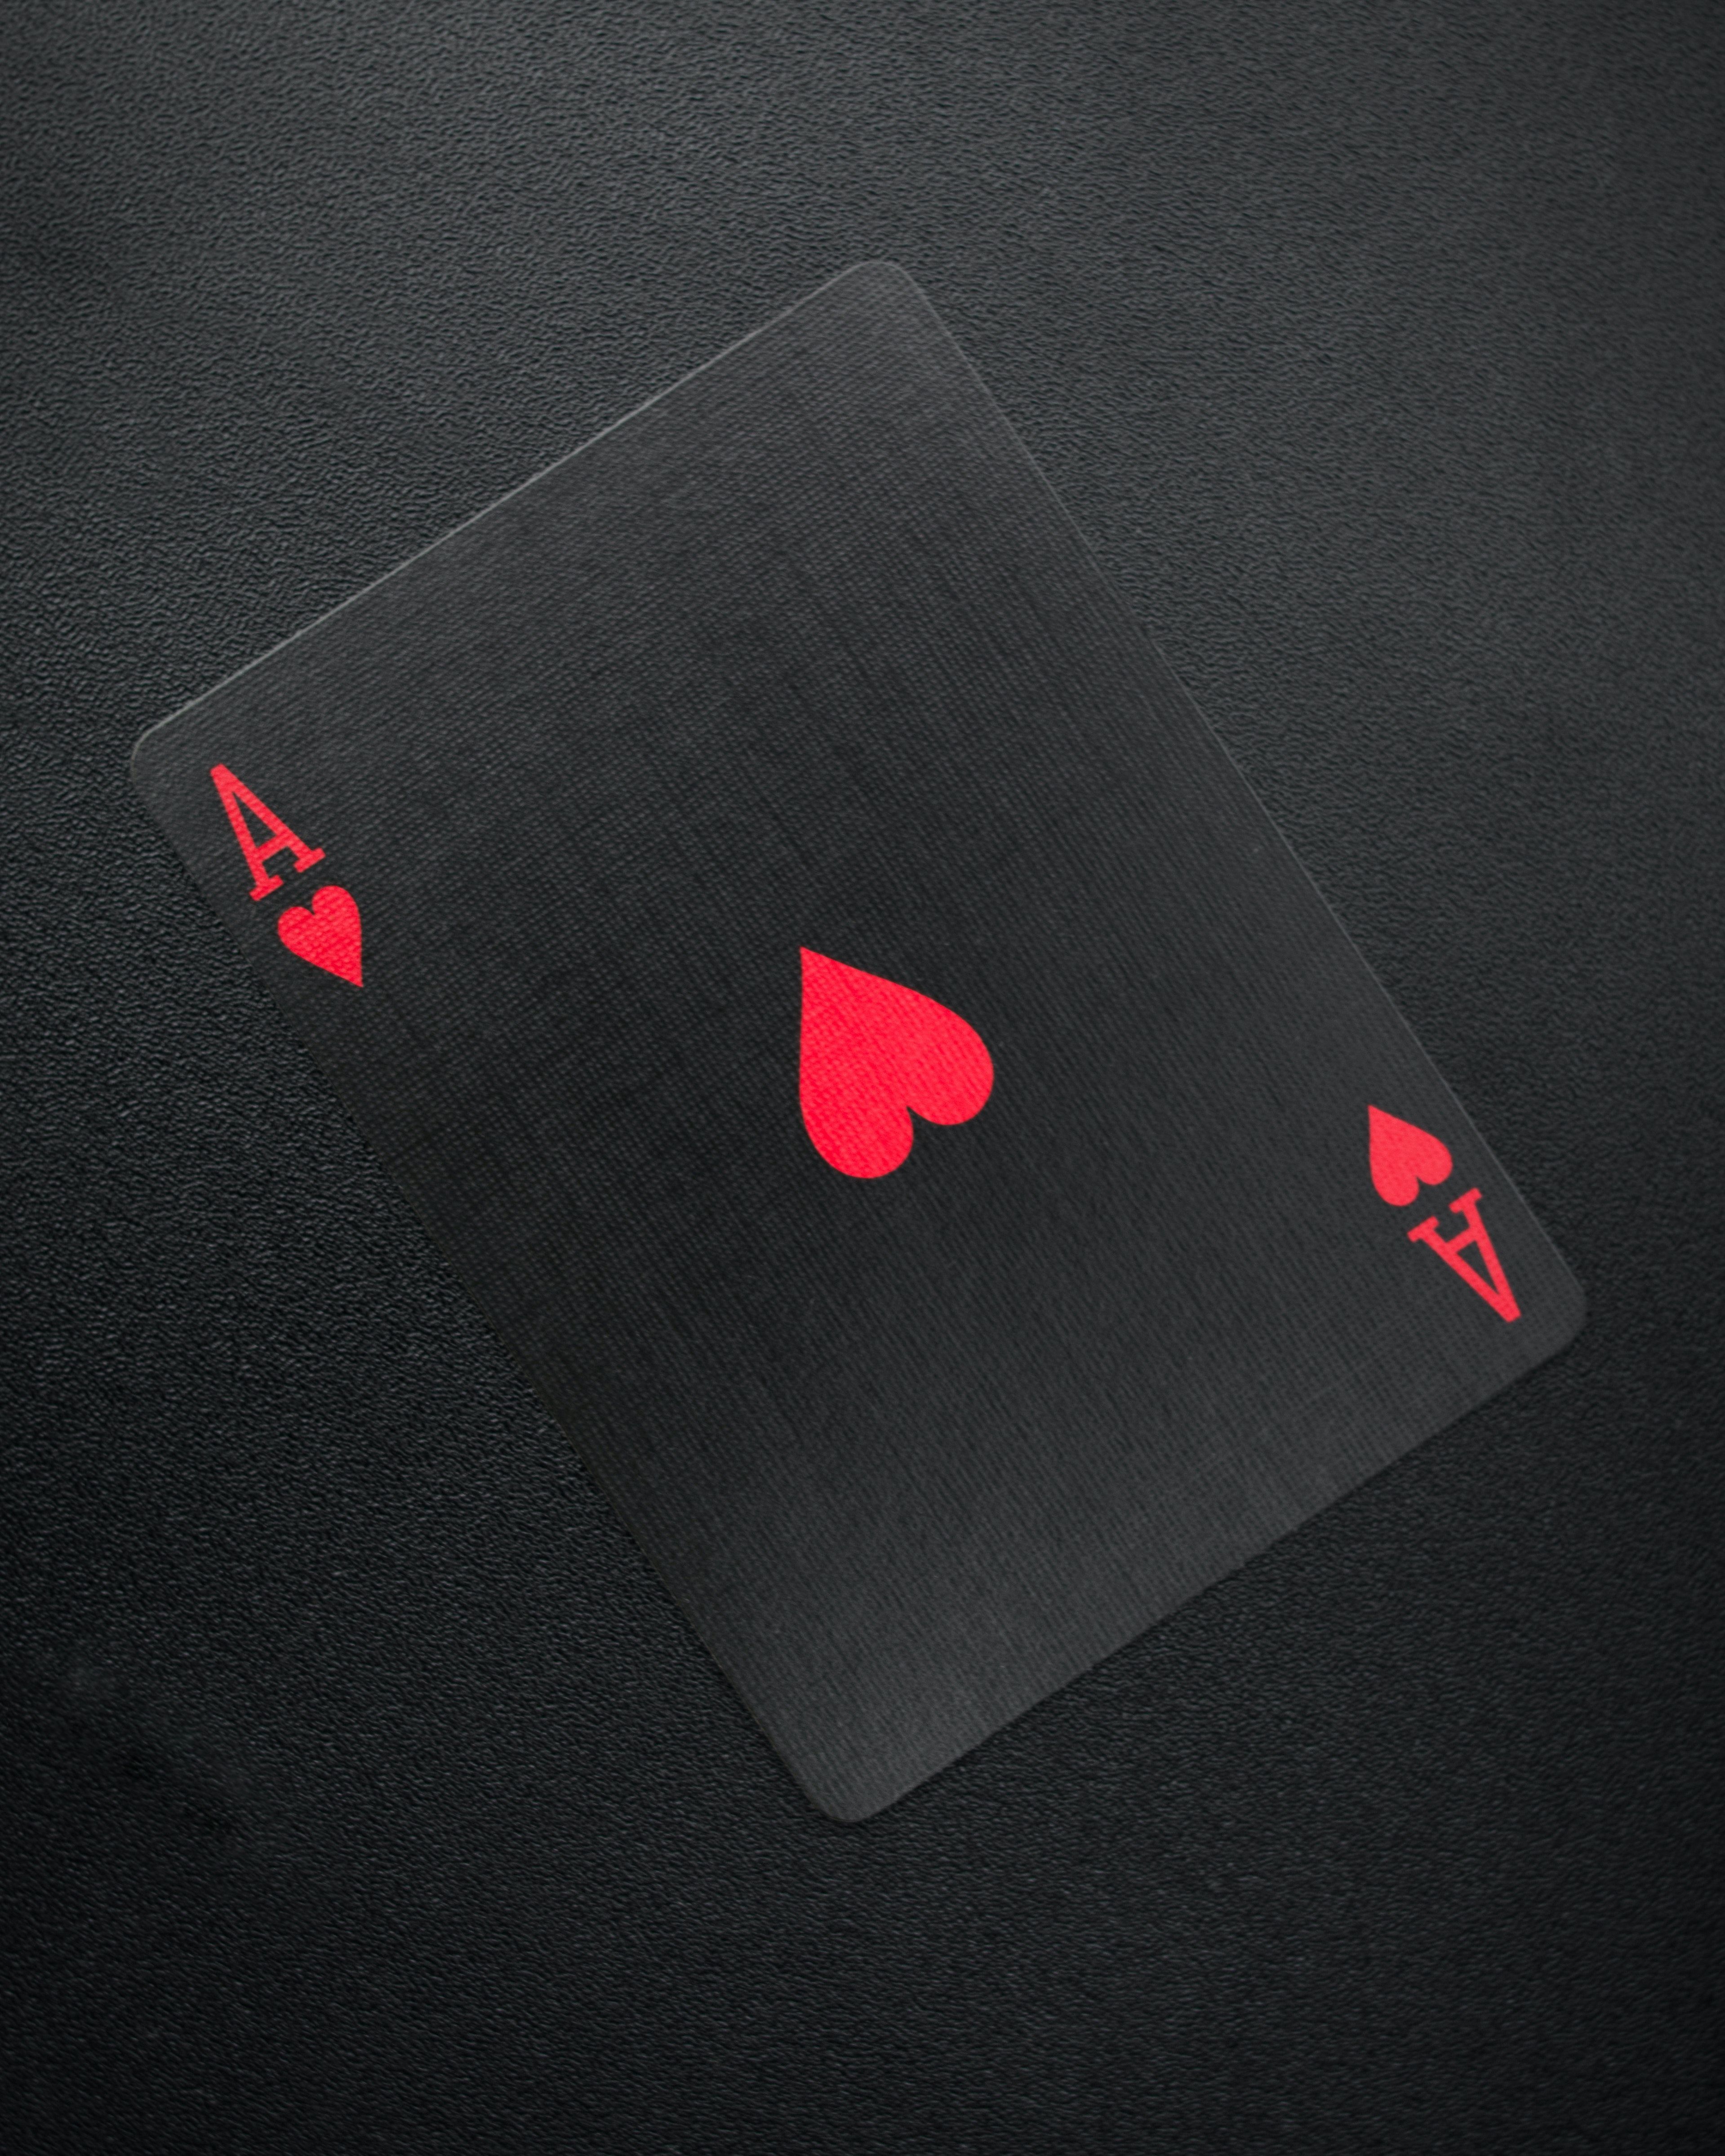 Ace of Hearts Card on Black Background .pexels.com